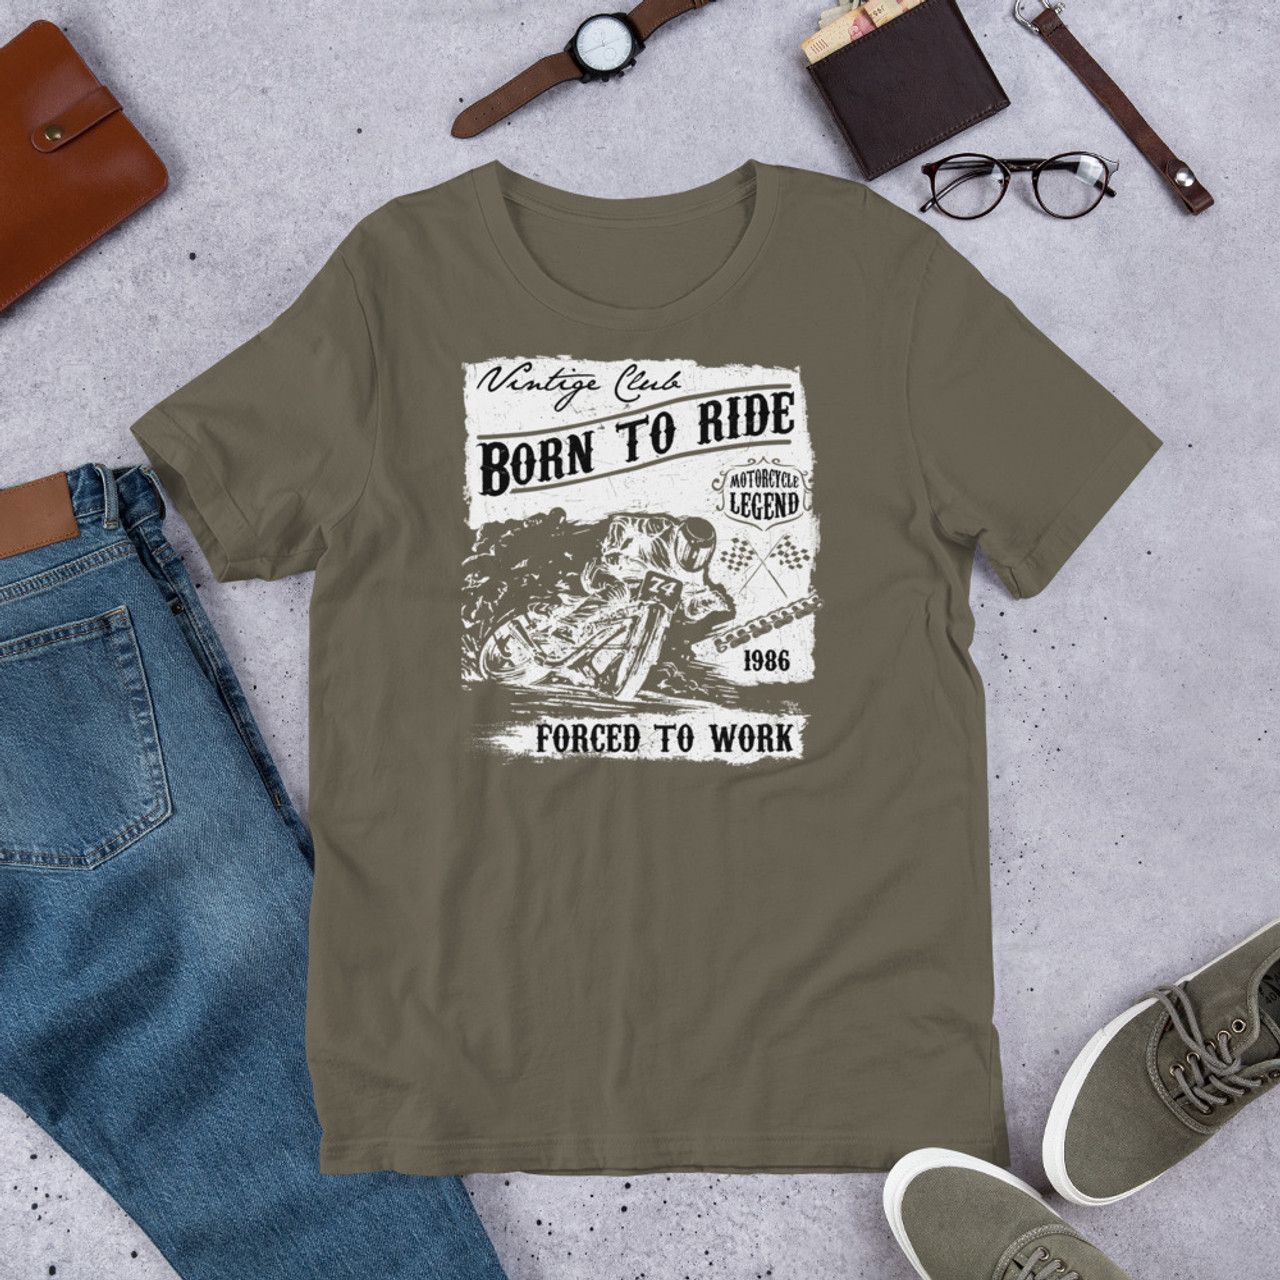 Army t shirt born to ride